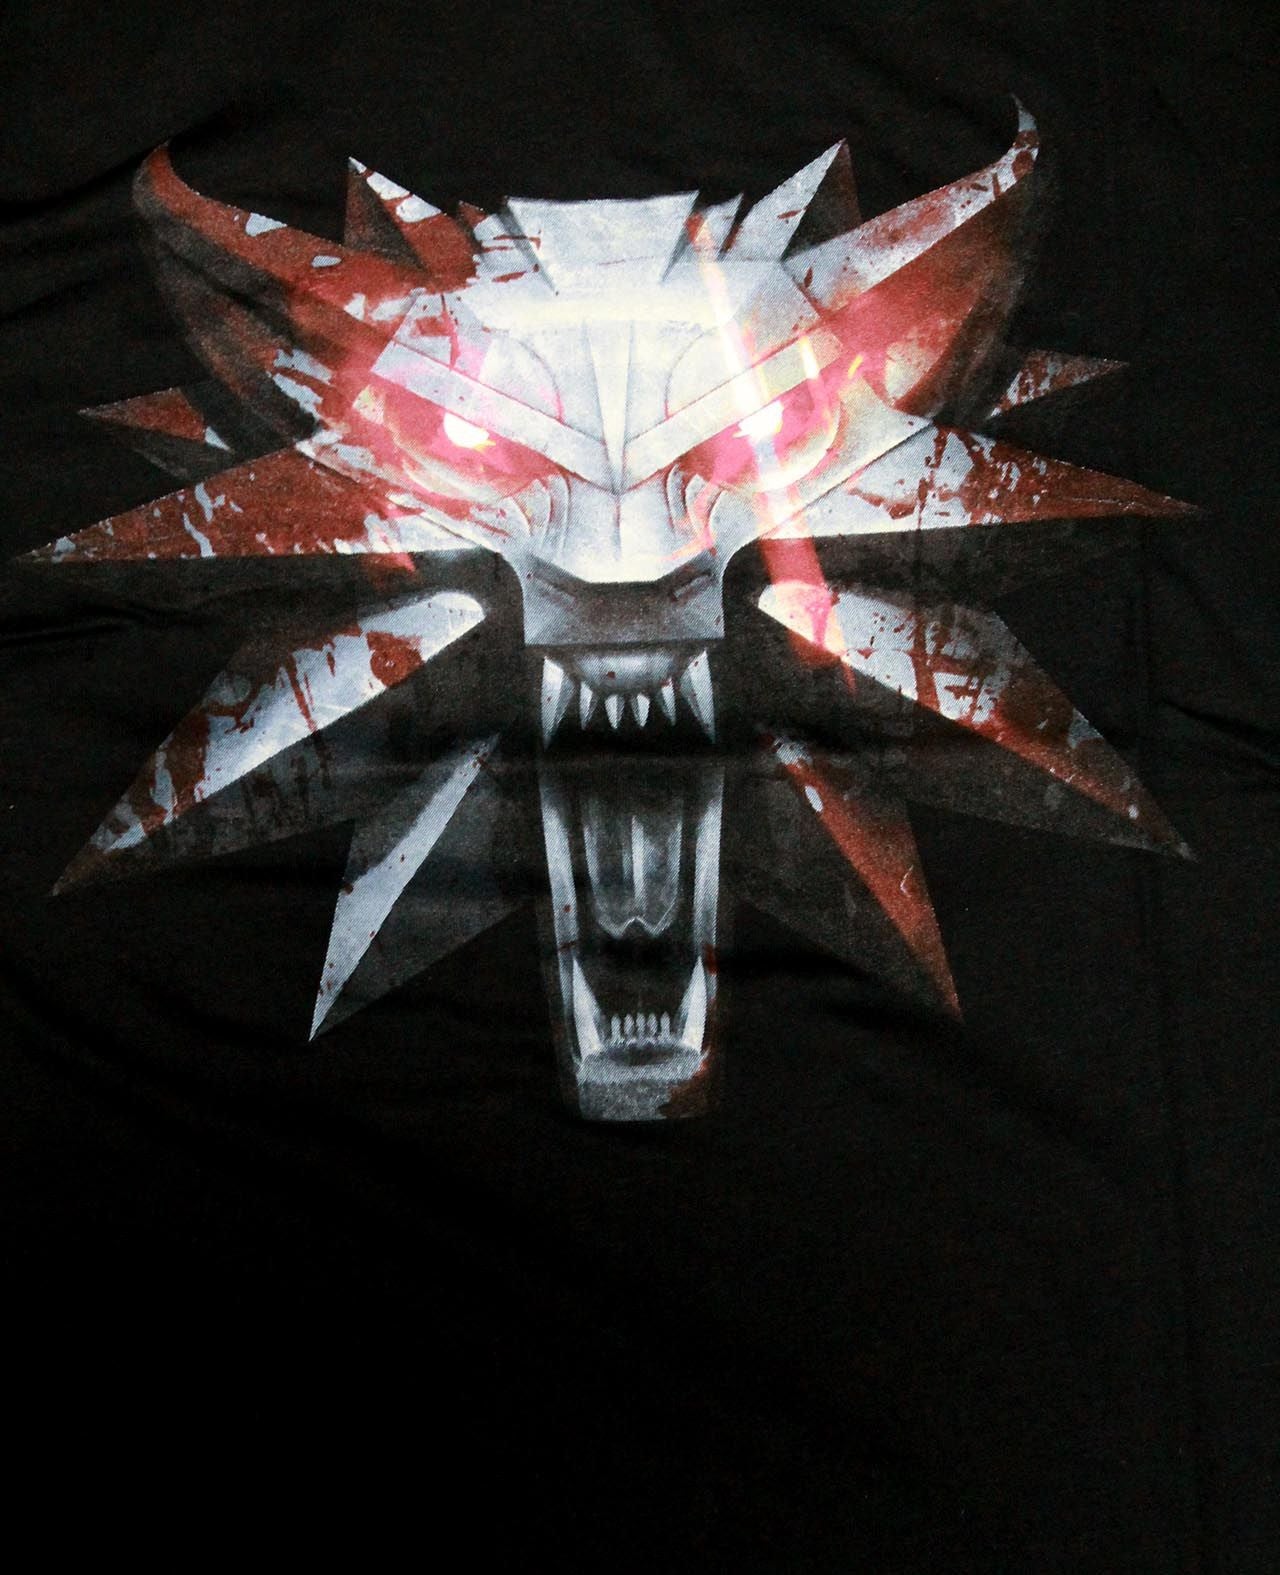 The Witcher T-shirt - Wolf Medallion